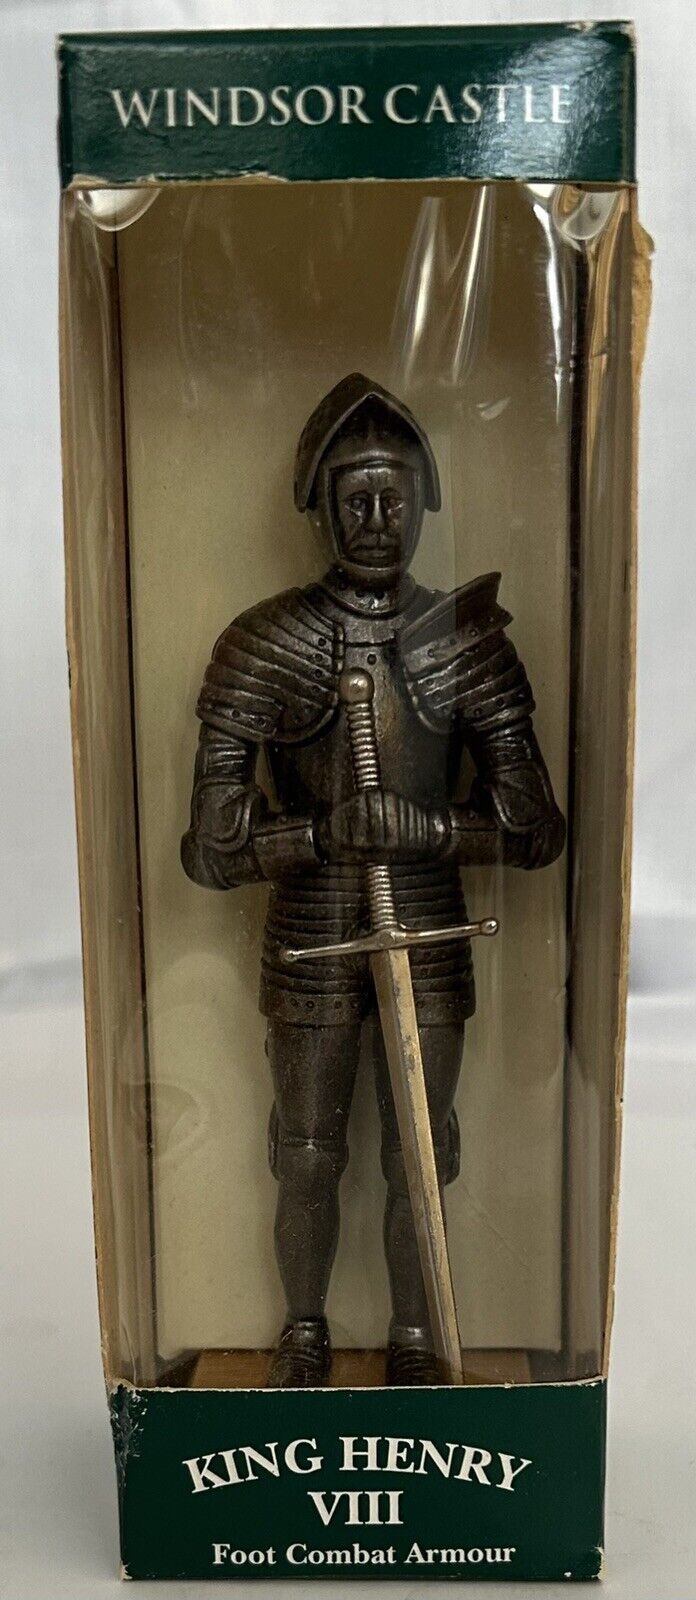 King Henry VIII Foot Combat Armour / Pewter Statue w/Wooden Base-Circa 1520/ NEW